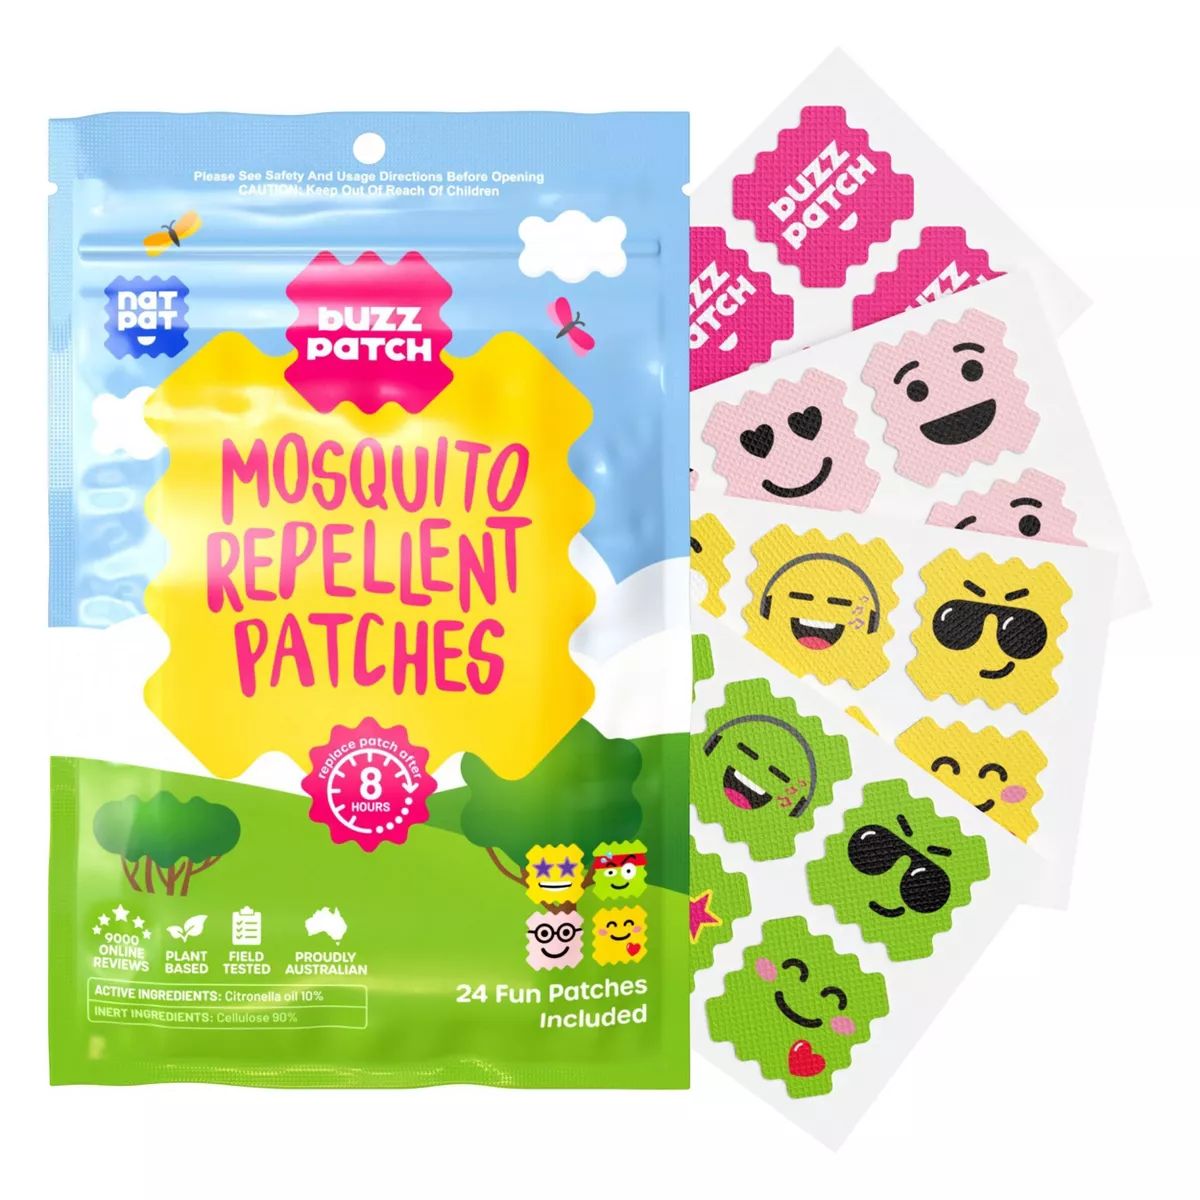 NATPAT 24ct Buzz Patch Mosquito Repellent Patches Personal Repellent | Target